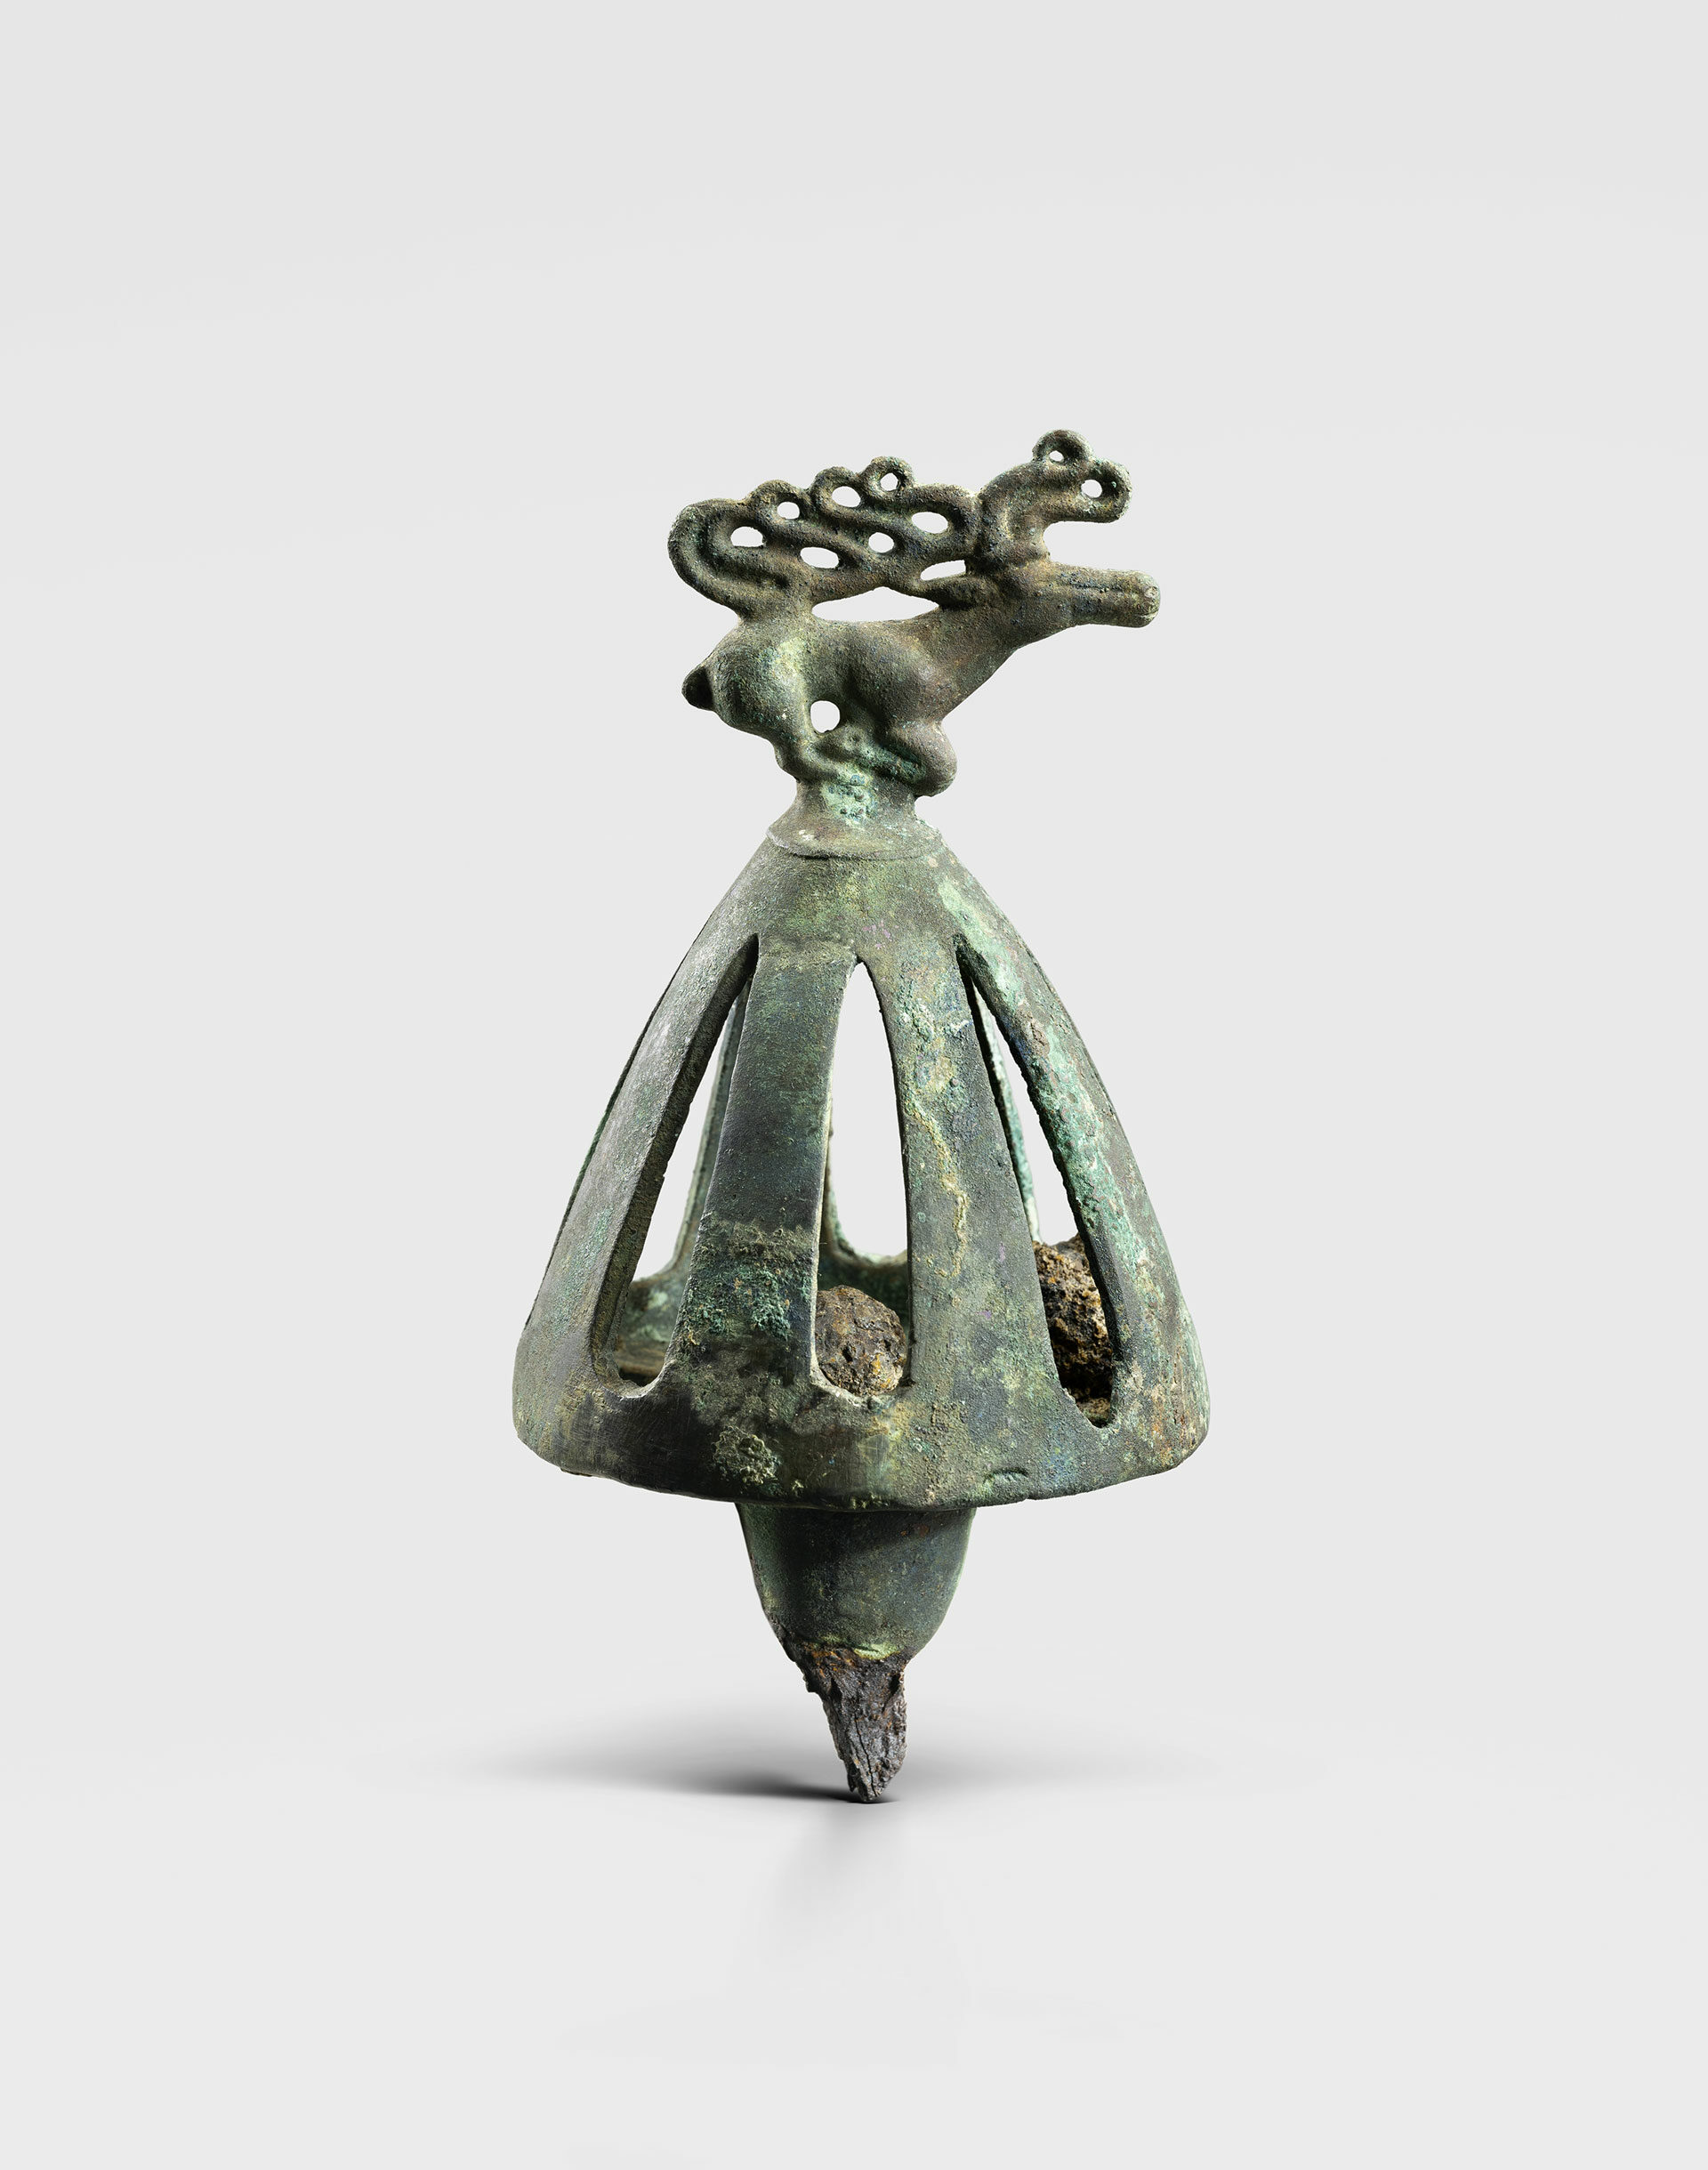 Scythian Carriage Rattle topped by a Stag